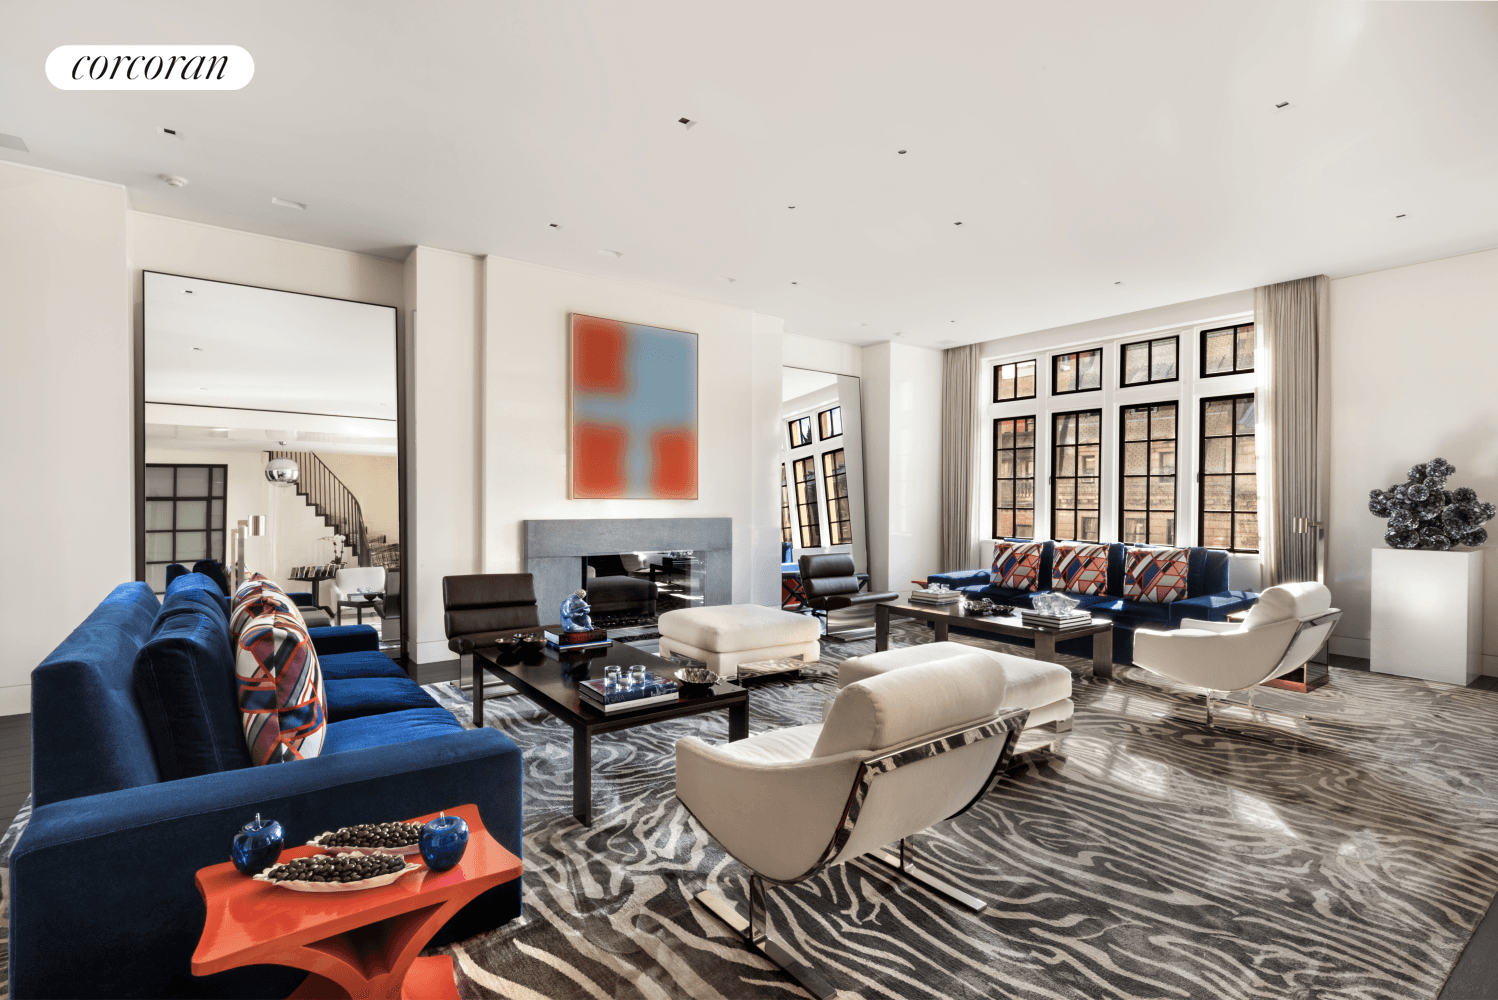 Welcome to this impeccably designed and perfectly appointed duplex at 9 East 79th Street.